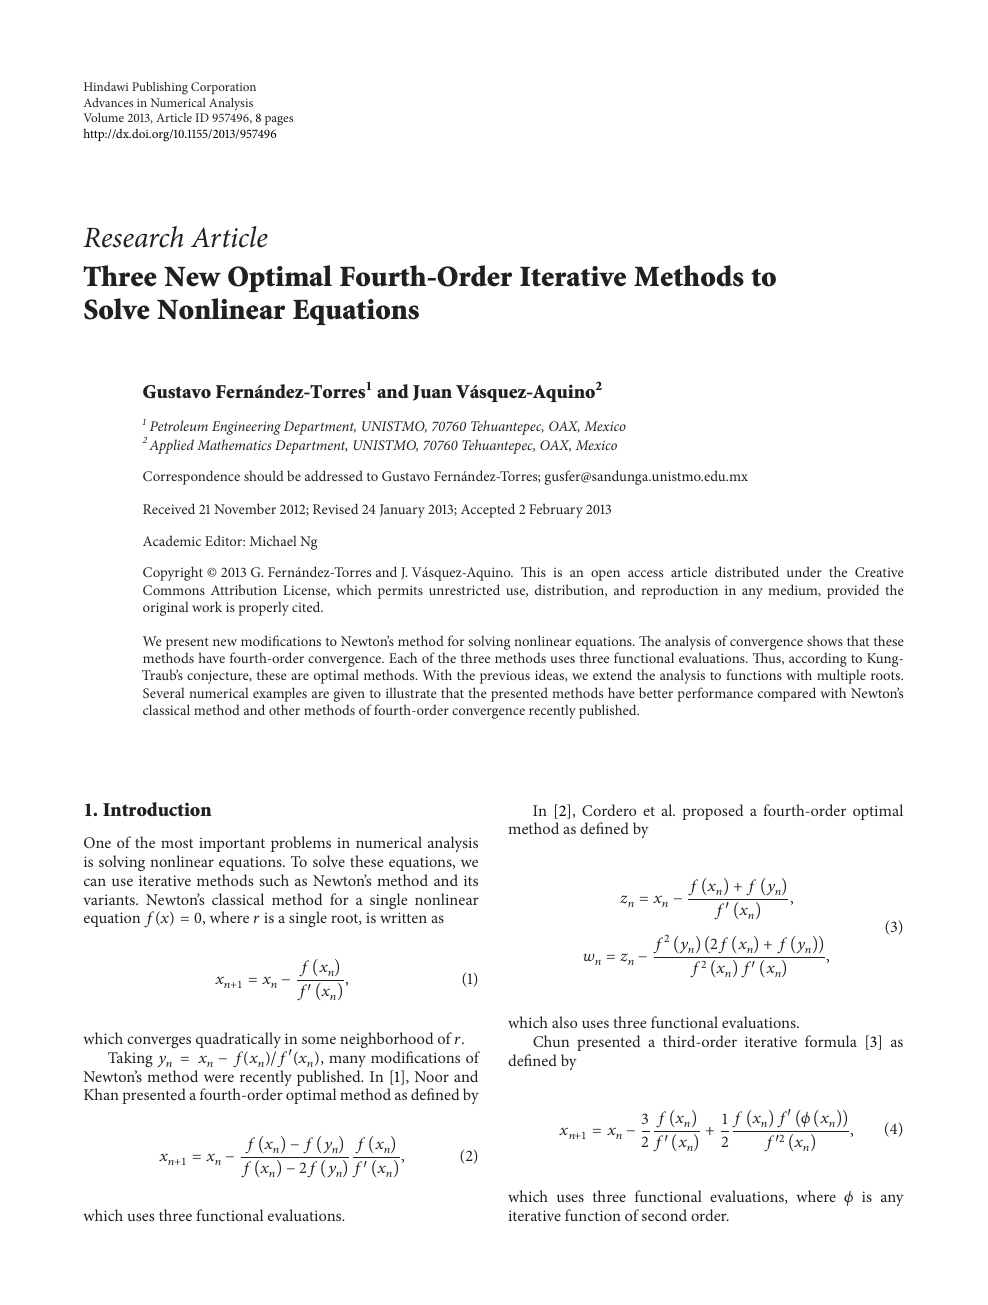 Three New Optimal Fourth Order Iterative Methods To Solve Nonlinear Equations Topic Of Research Paper In Mathematics Download Scholarly Article Pdf And Read For Free On Cyberleninka Open Science Hub